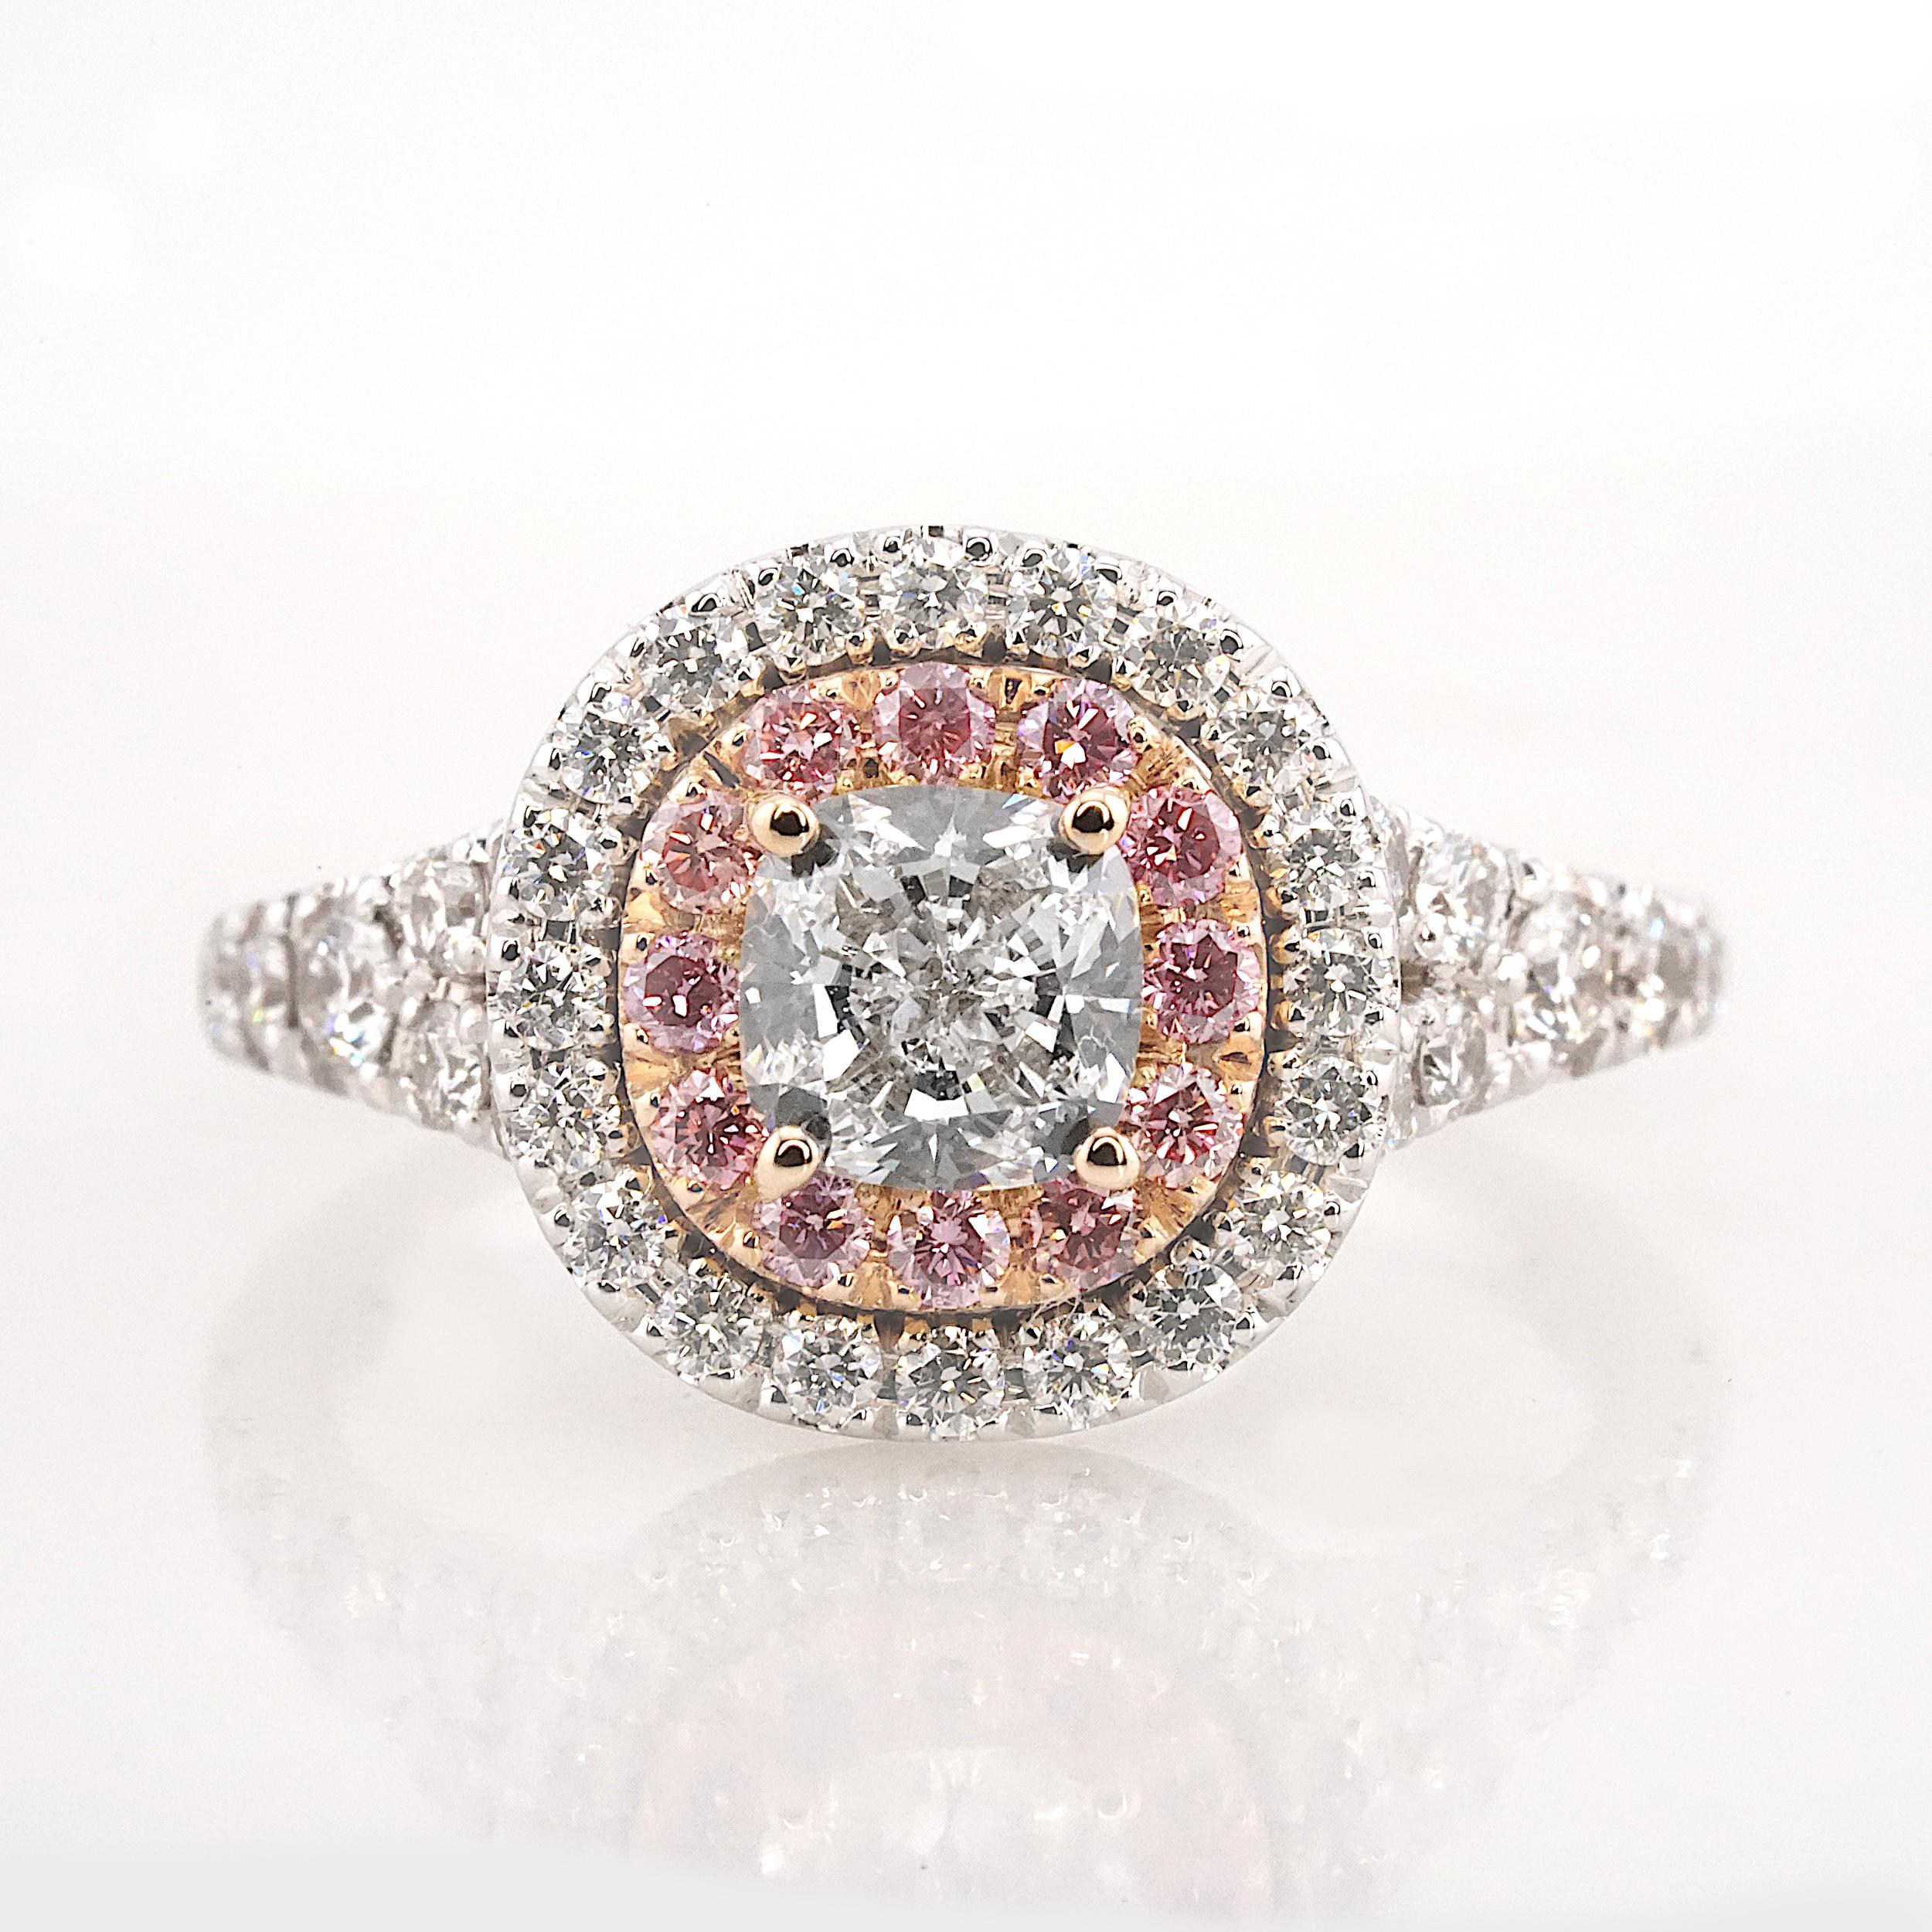 Info: 0.81 carat cushion cut F color diamond double pink & white halo ring - 0.21 ct pink diamonds - 0.61 ct accent white diamonds - 7.08g gold

Indulge in the enchanting allure of this Italian-crafted ring, a masterpiece showcasing the coveted